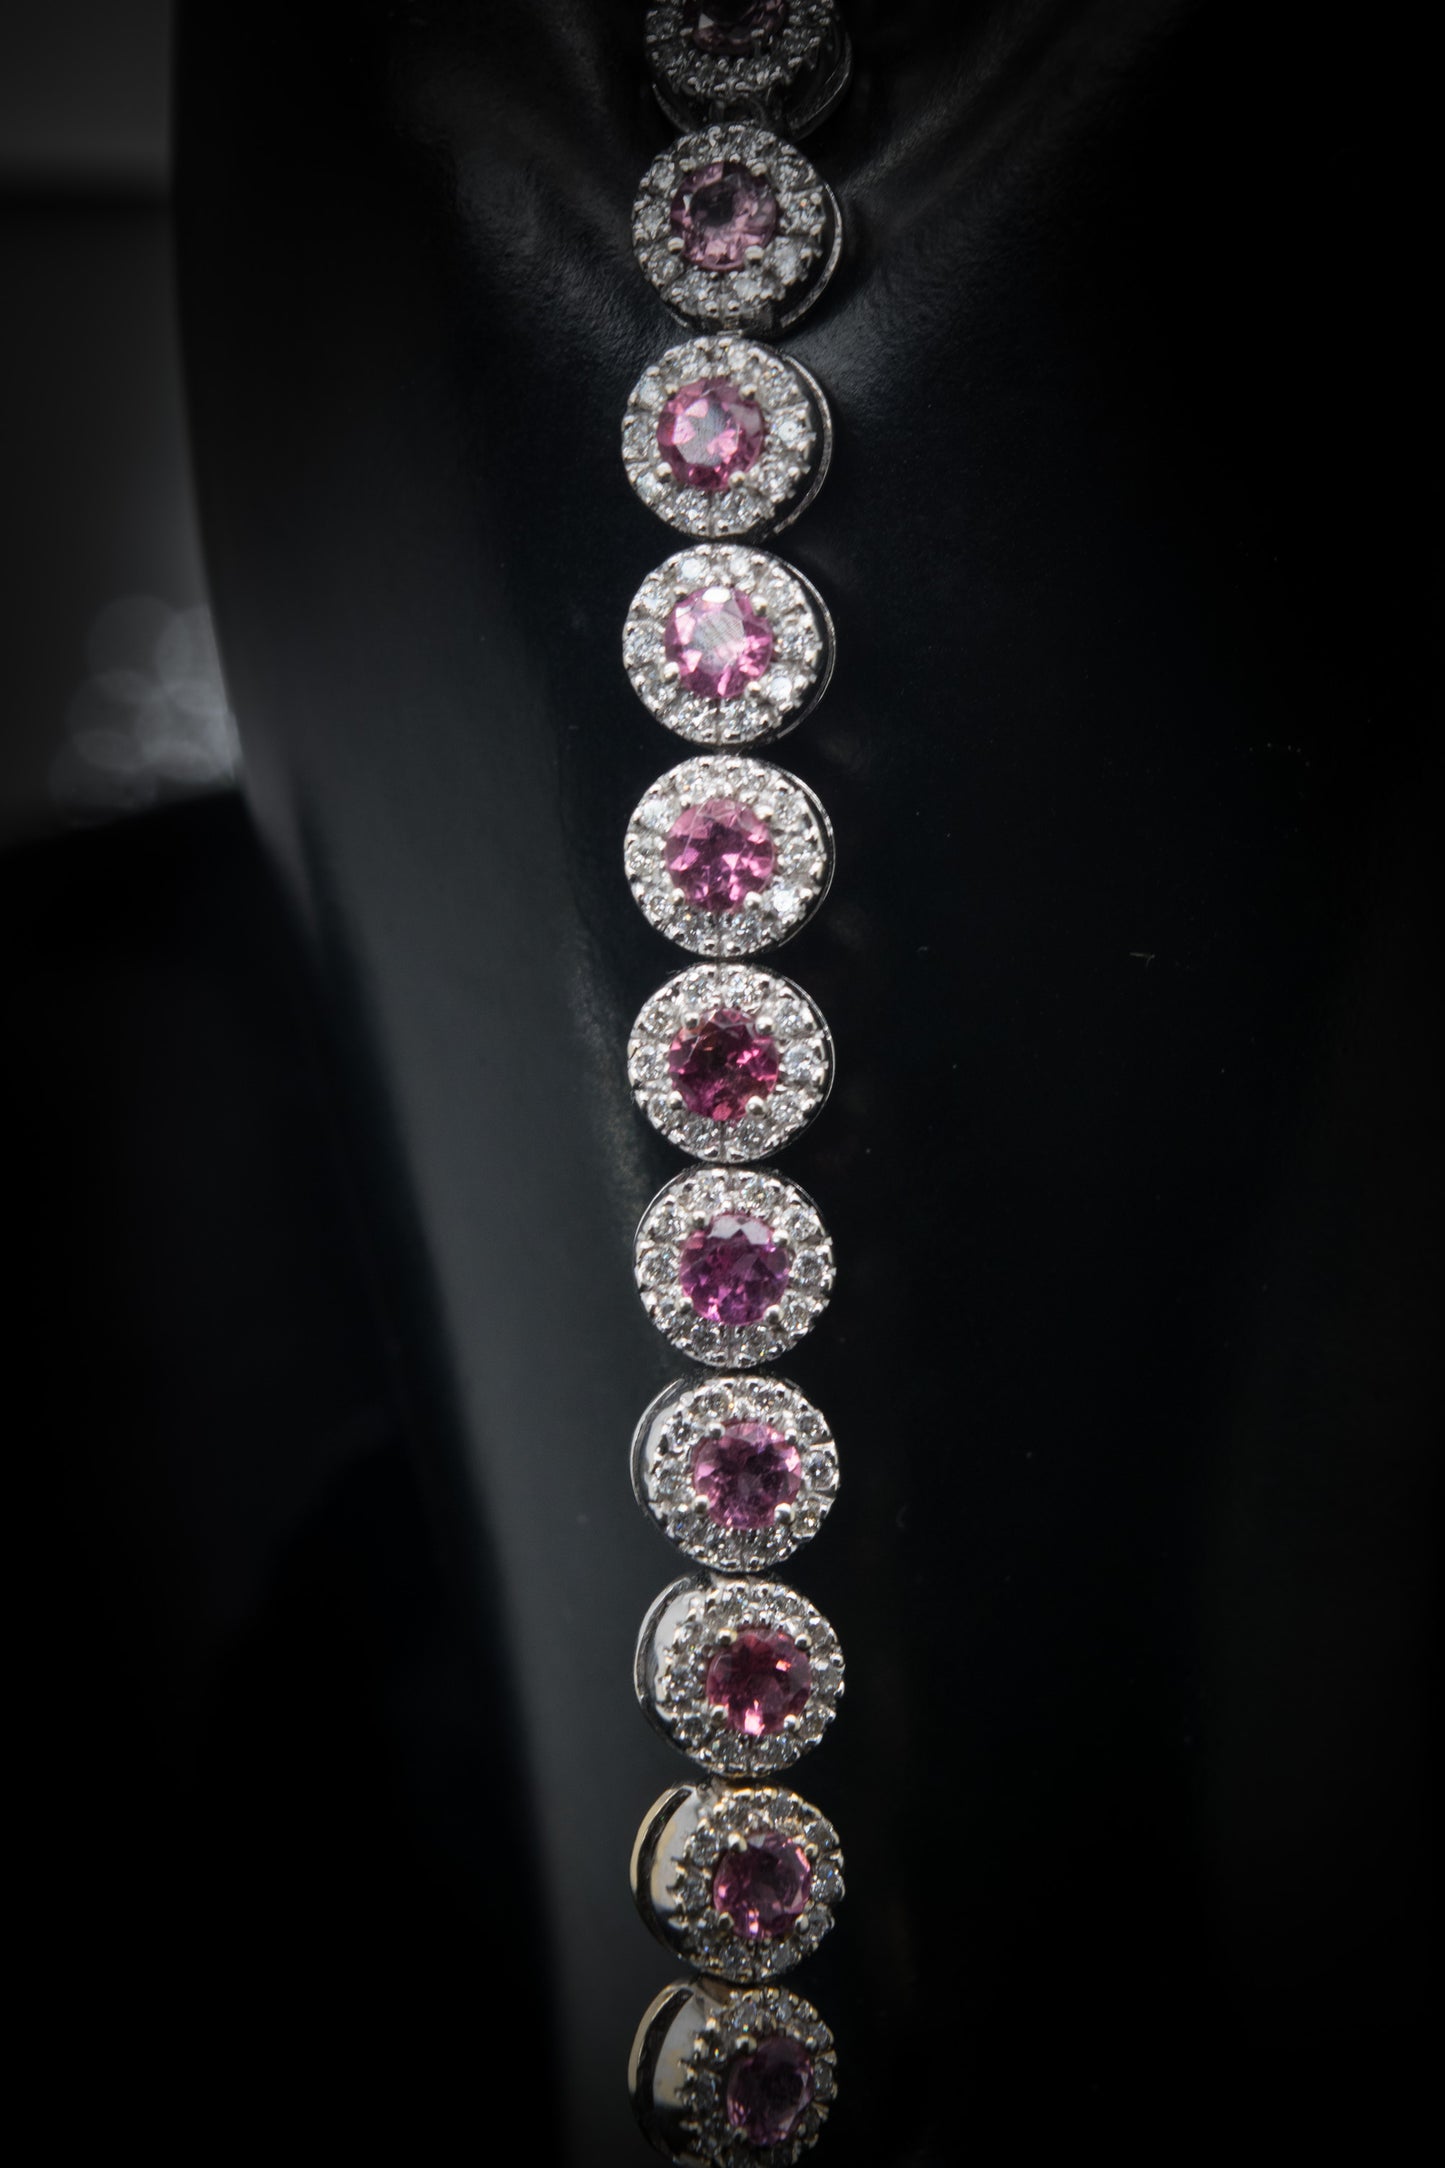 18kt WG Bracelet with Pink Sapphire and Diamond.